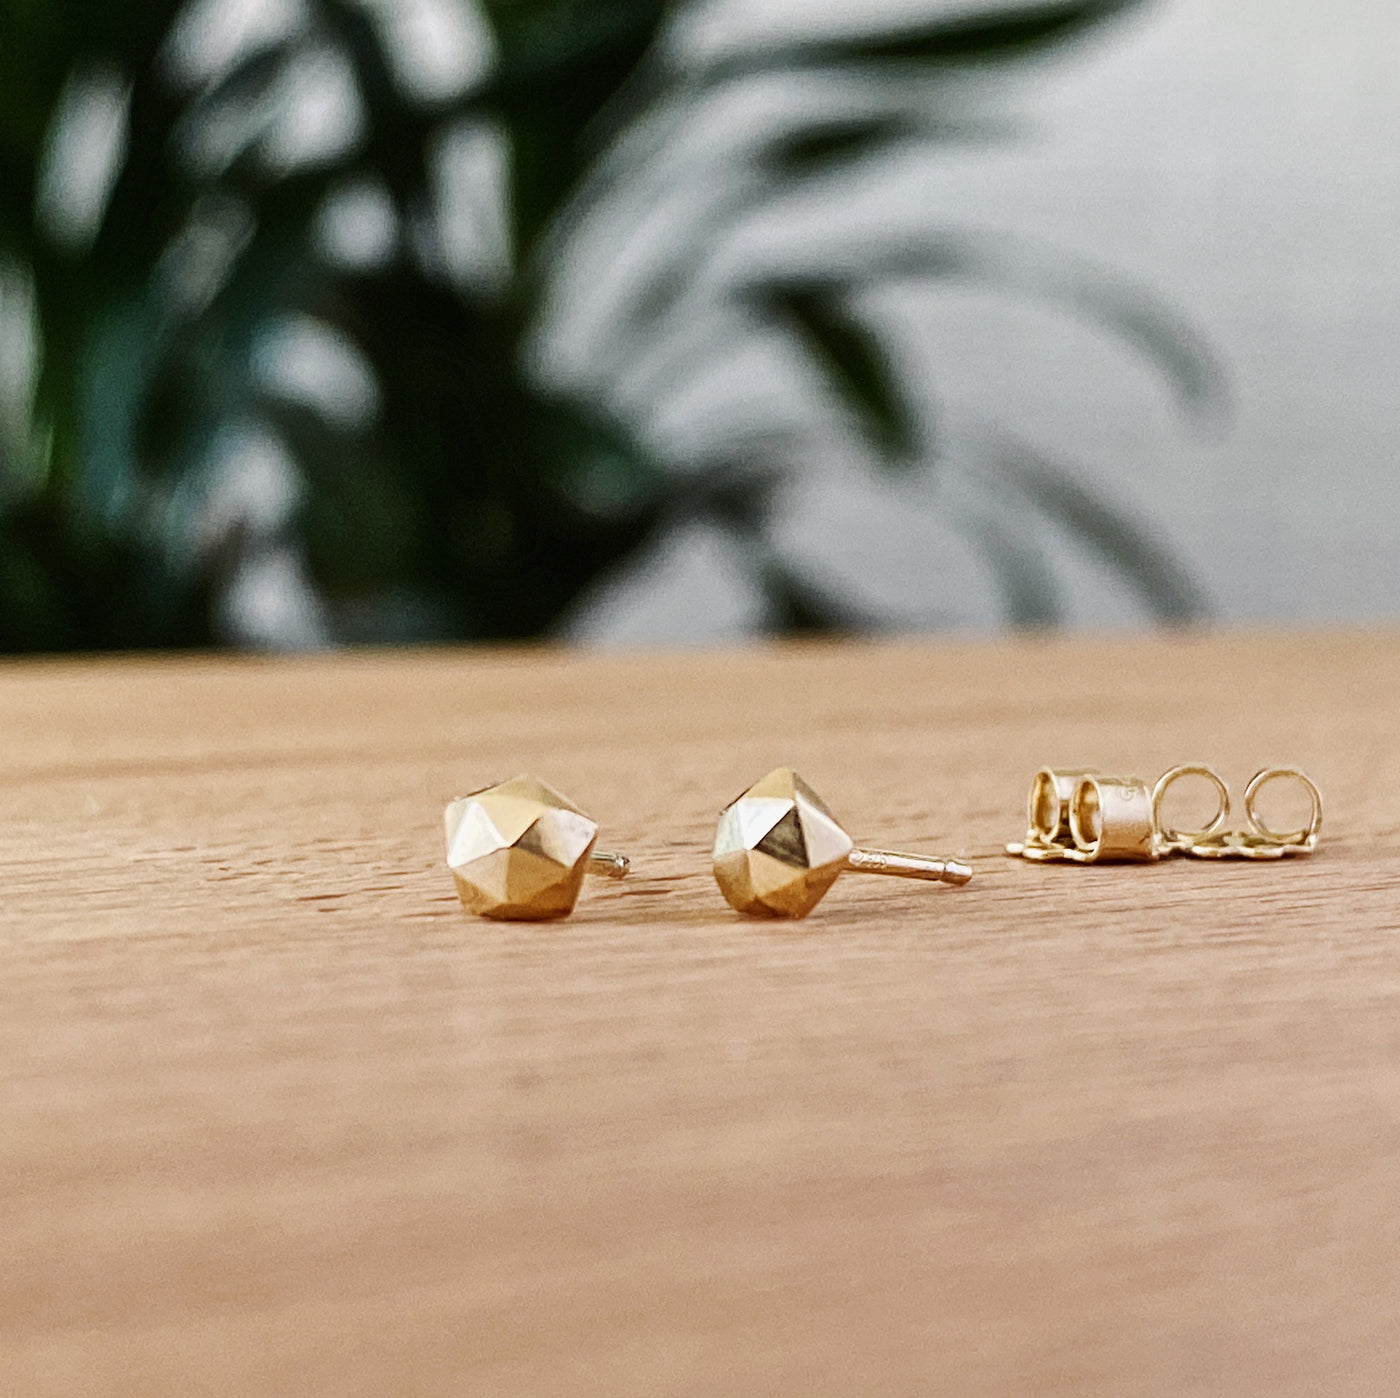 Micro Fragment small faceted stud earrings in gold vermeil by Corey Egan view #2